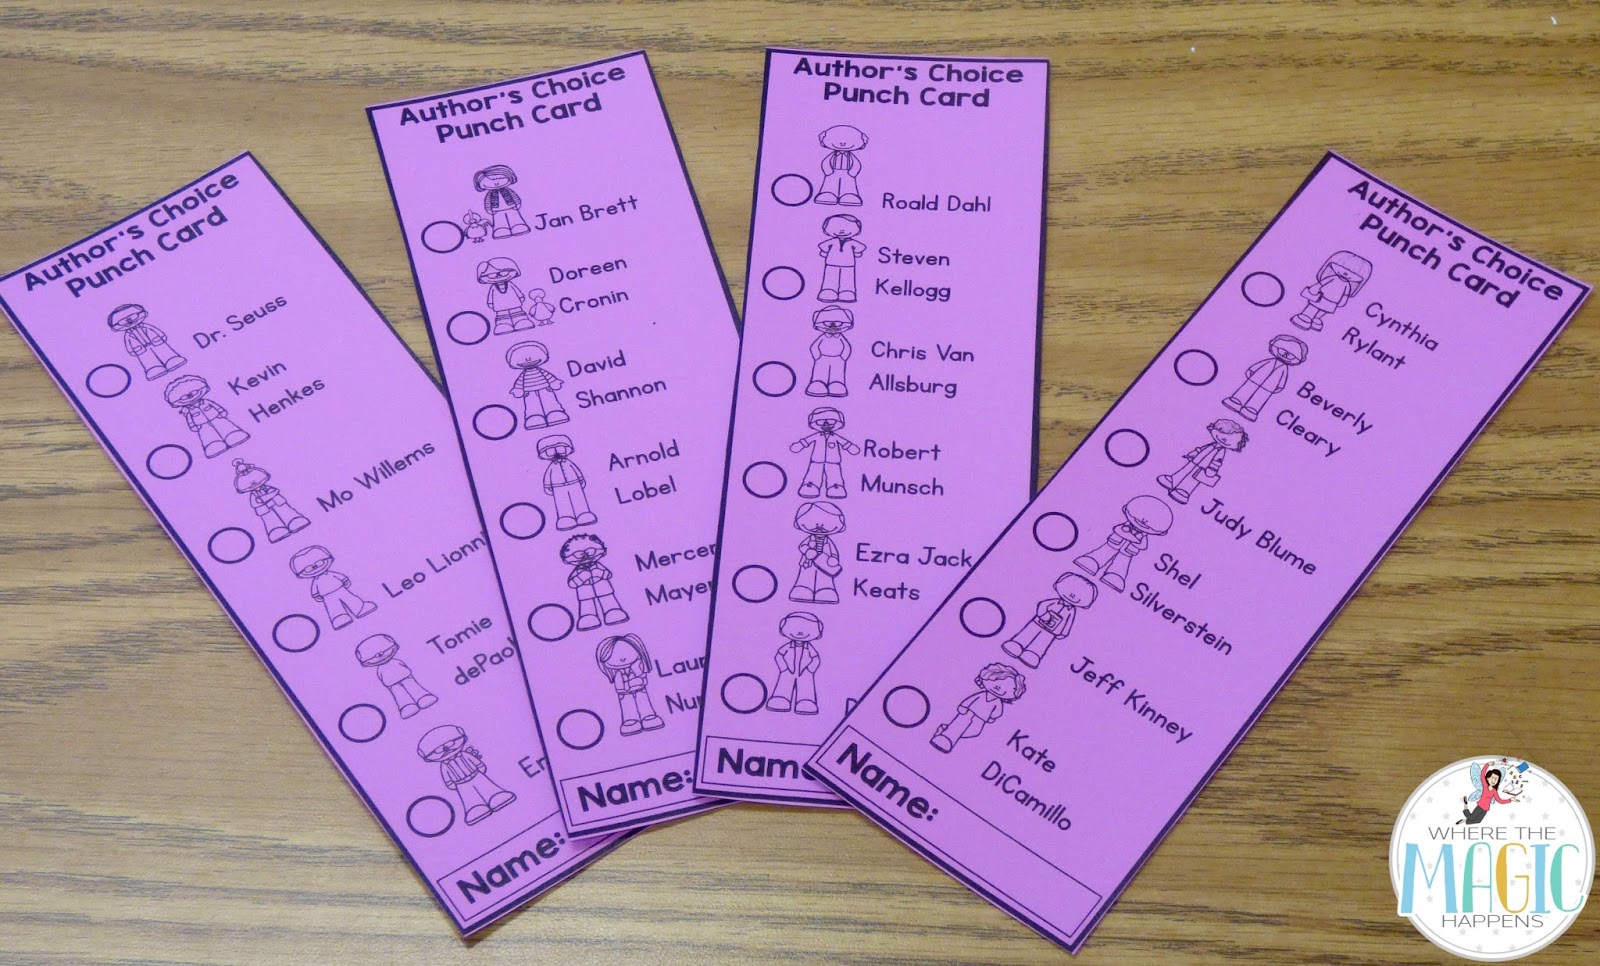 HOW TO USE CLASSROOM PUNCH PASS CARDS